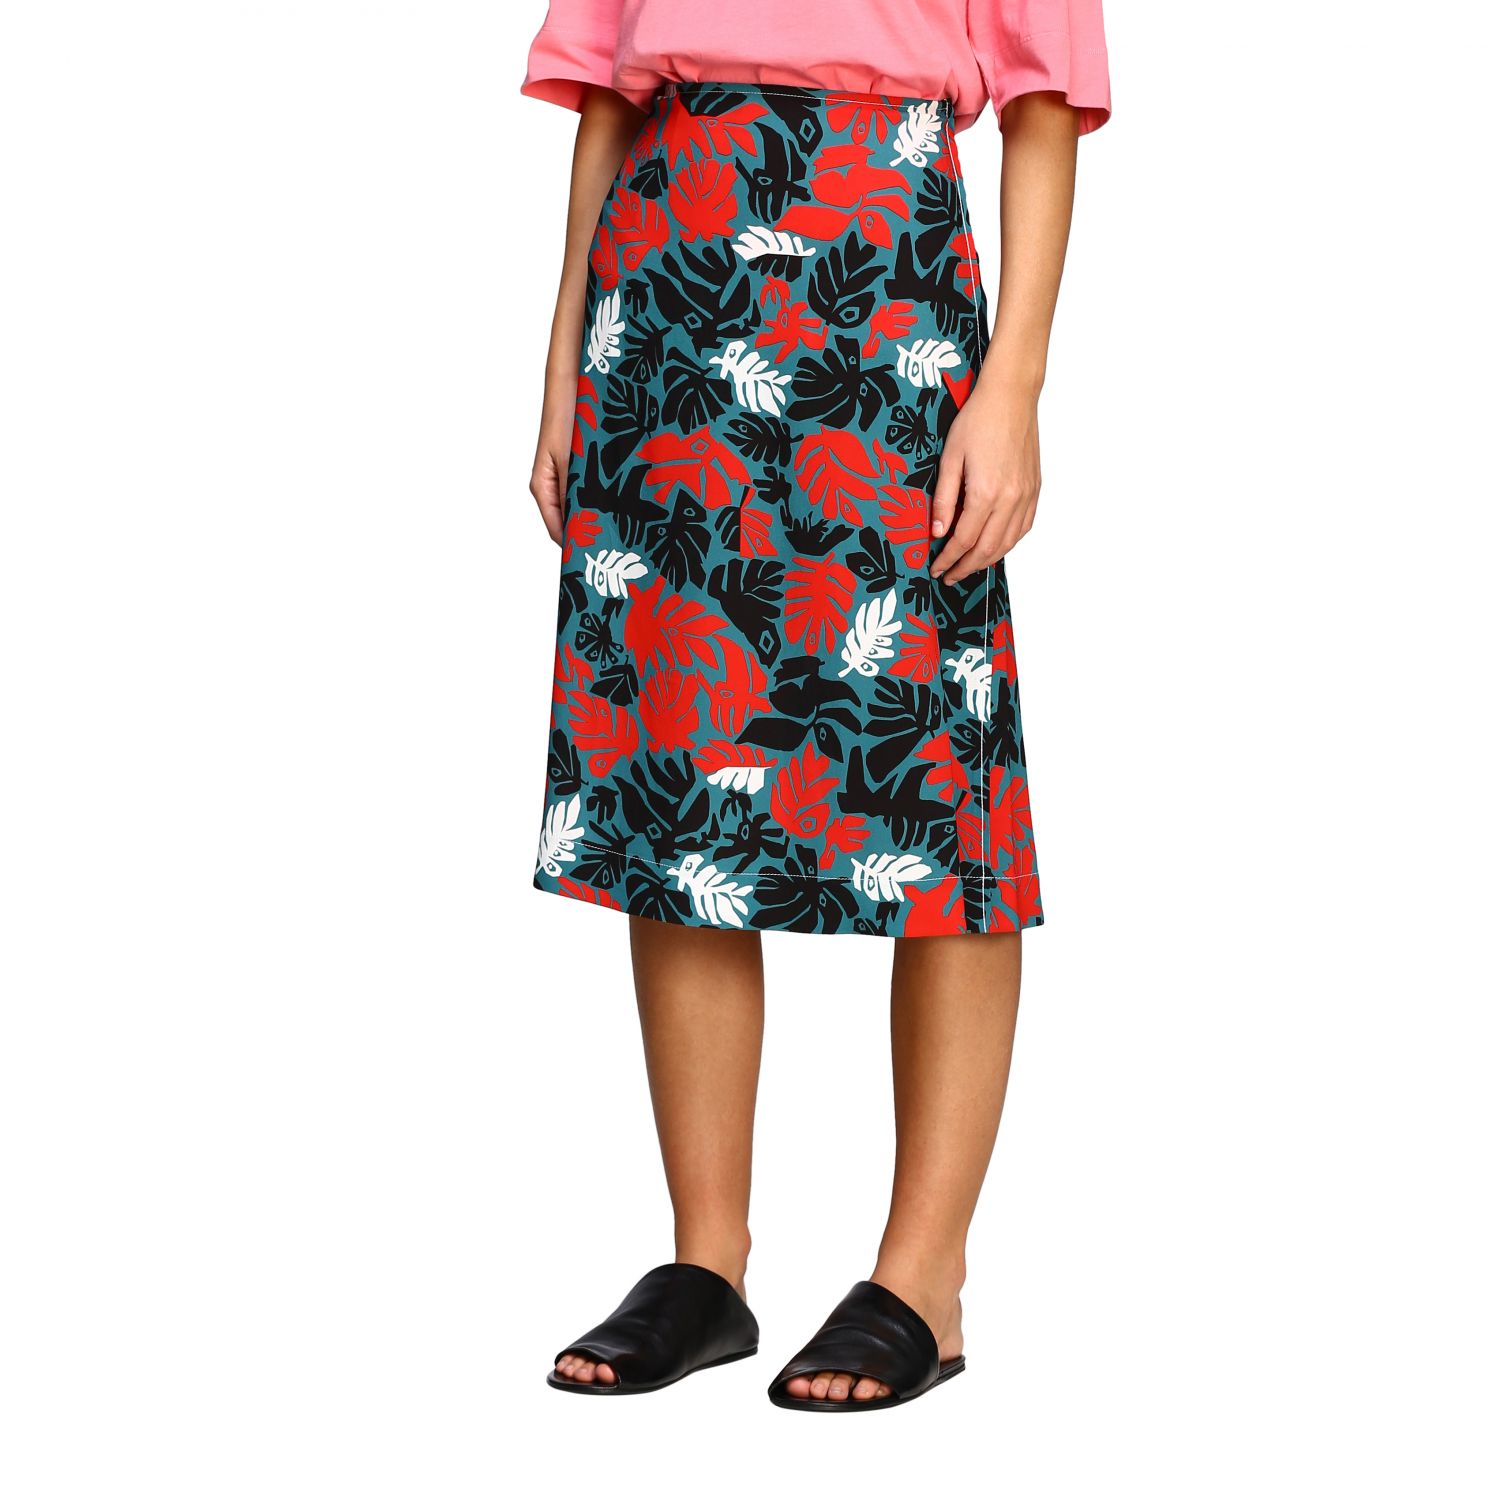 Marni skirt with all over leaves print